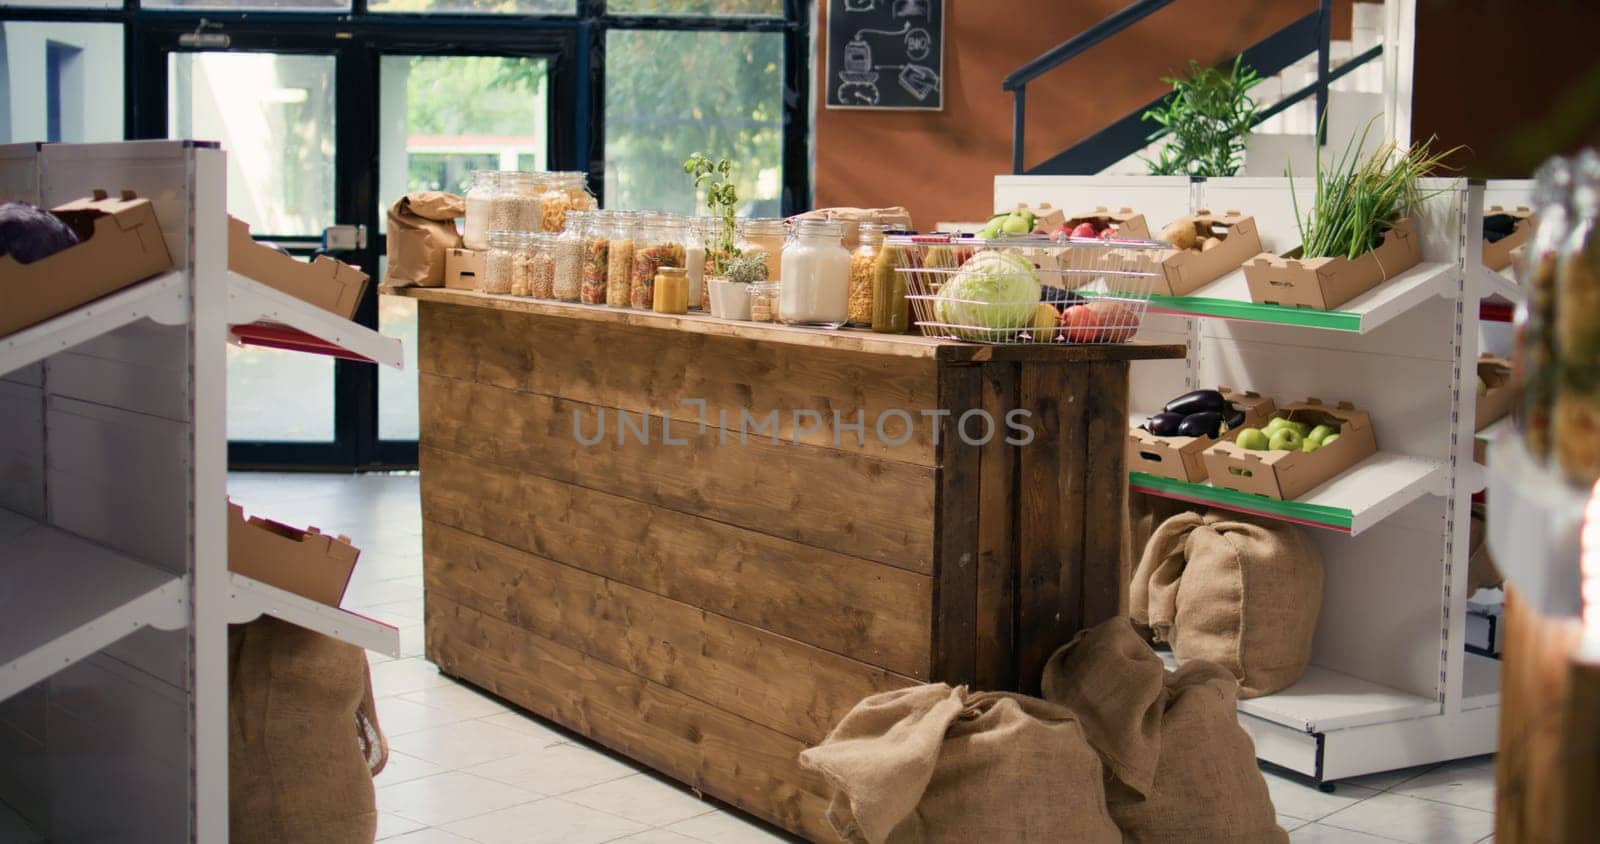 Bulk food items in reusable containers sold in zero waste supermarket to protect environmental changes. Eco friendly local shop with organic farming produce, pasta, spices and sauces.